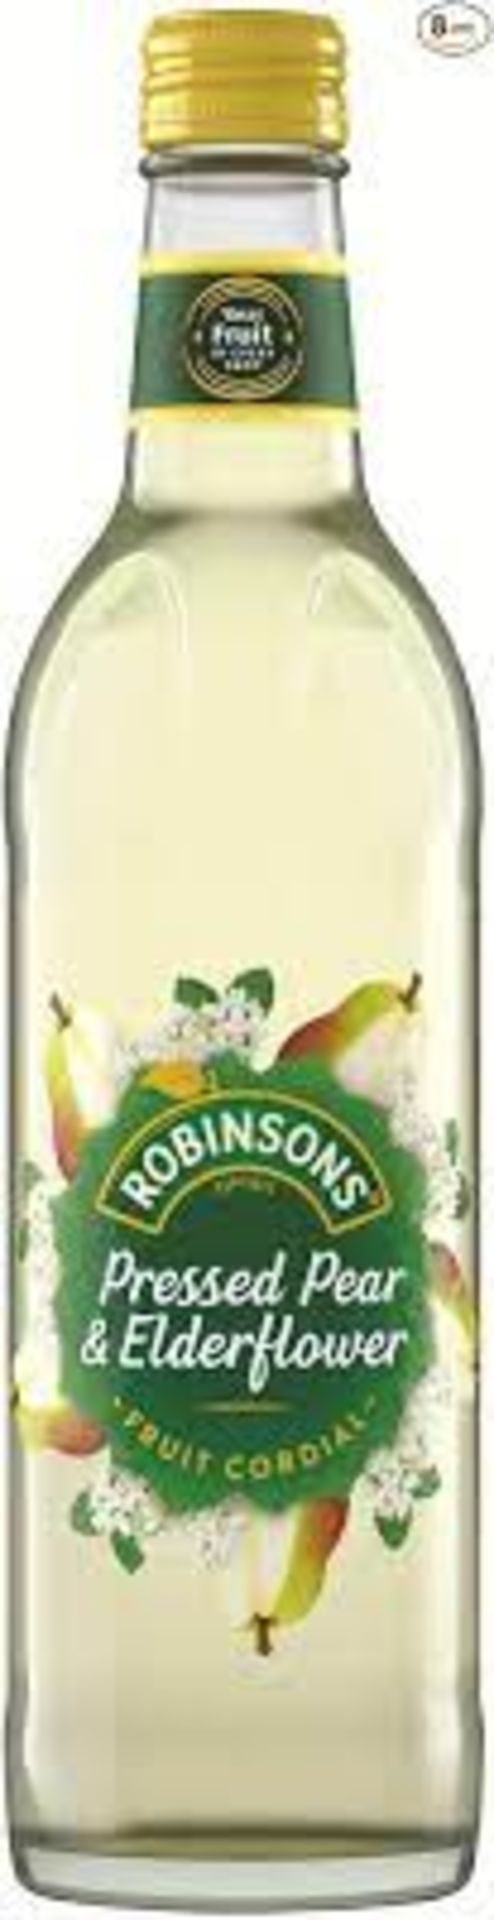 RRP £4810 Brand New And Sealed Pallet To Contain (162 Items) Robinsons Fruit Cordial, Pressed Pear